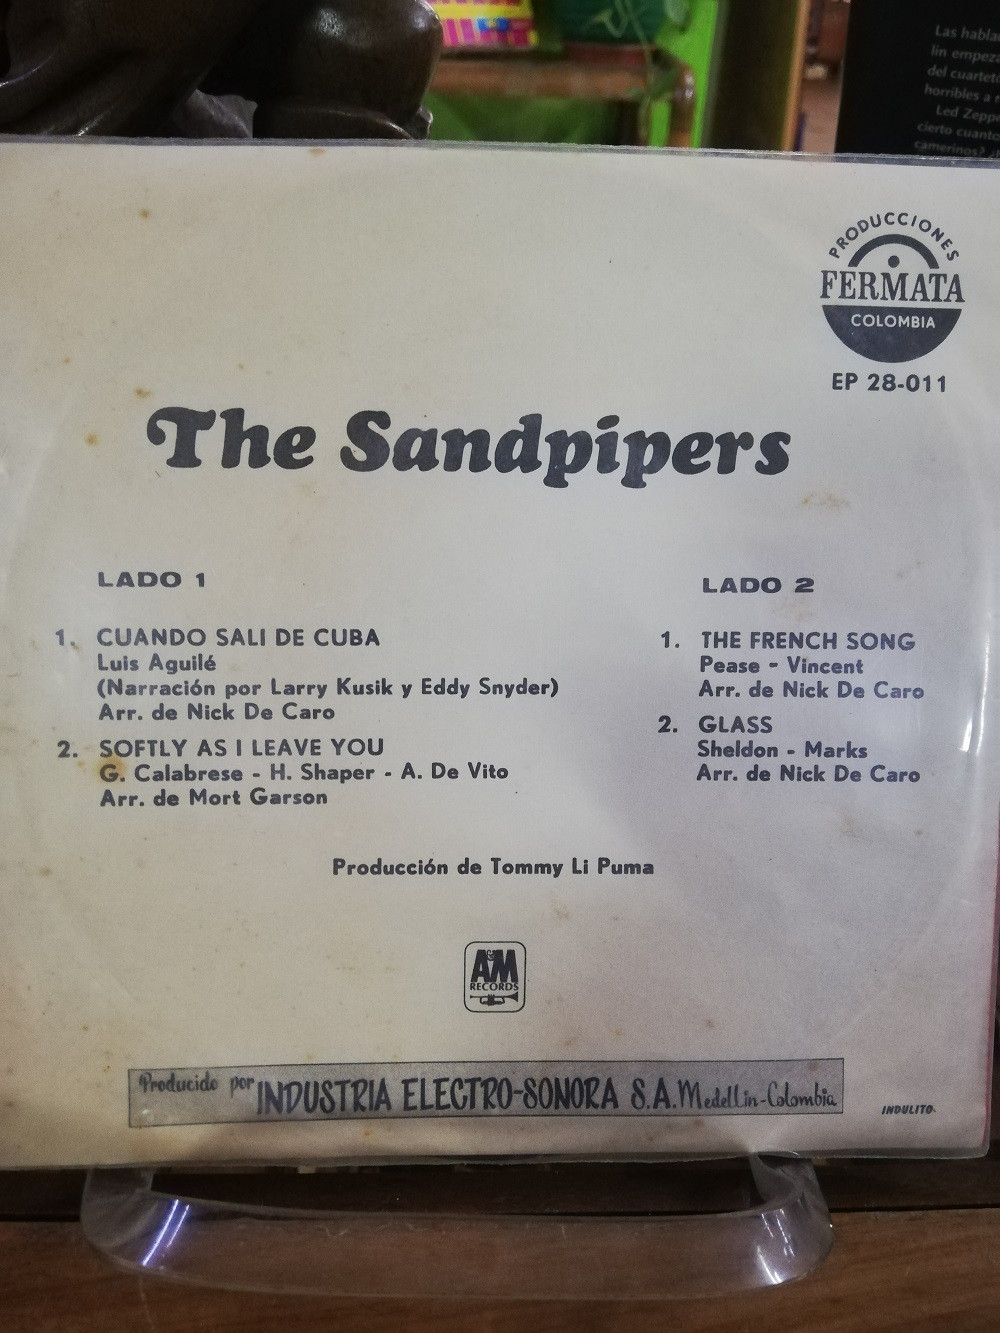 Imagen LP THE SANDPIPERS - CUANDO SALI DE CUBA-SOFTLY AS I LEAVE YOU / THE FRENCH SONG-GLASS 2